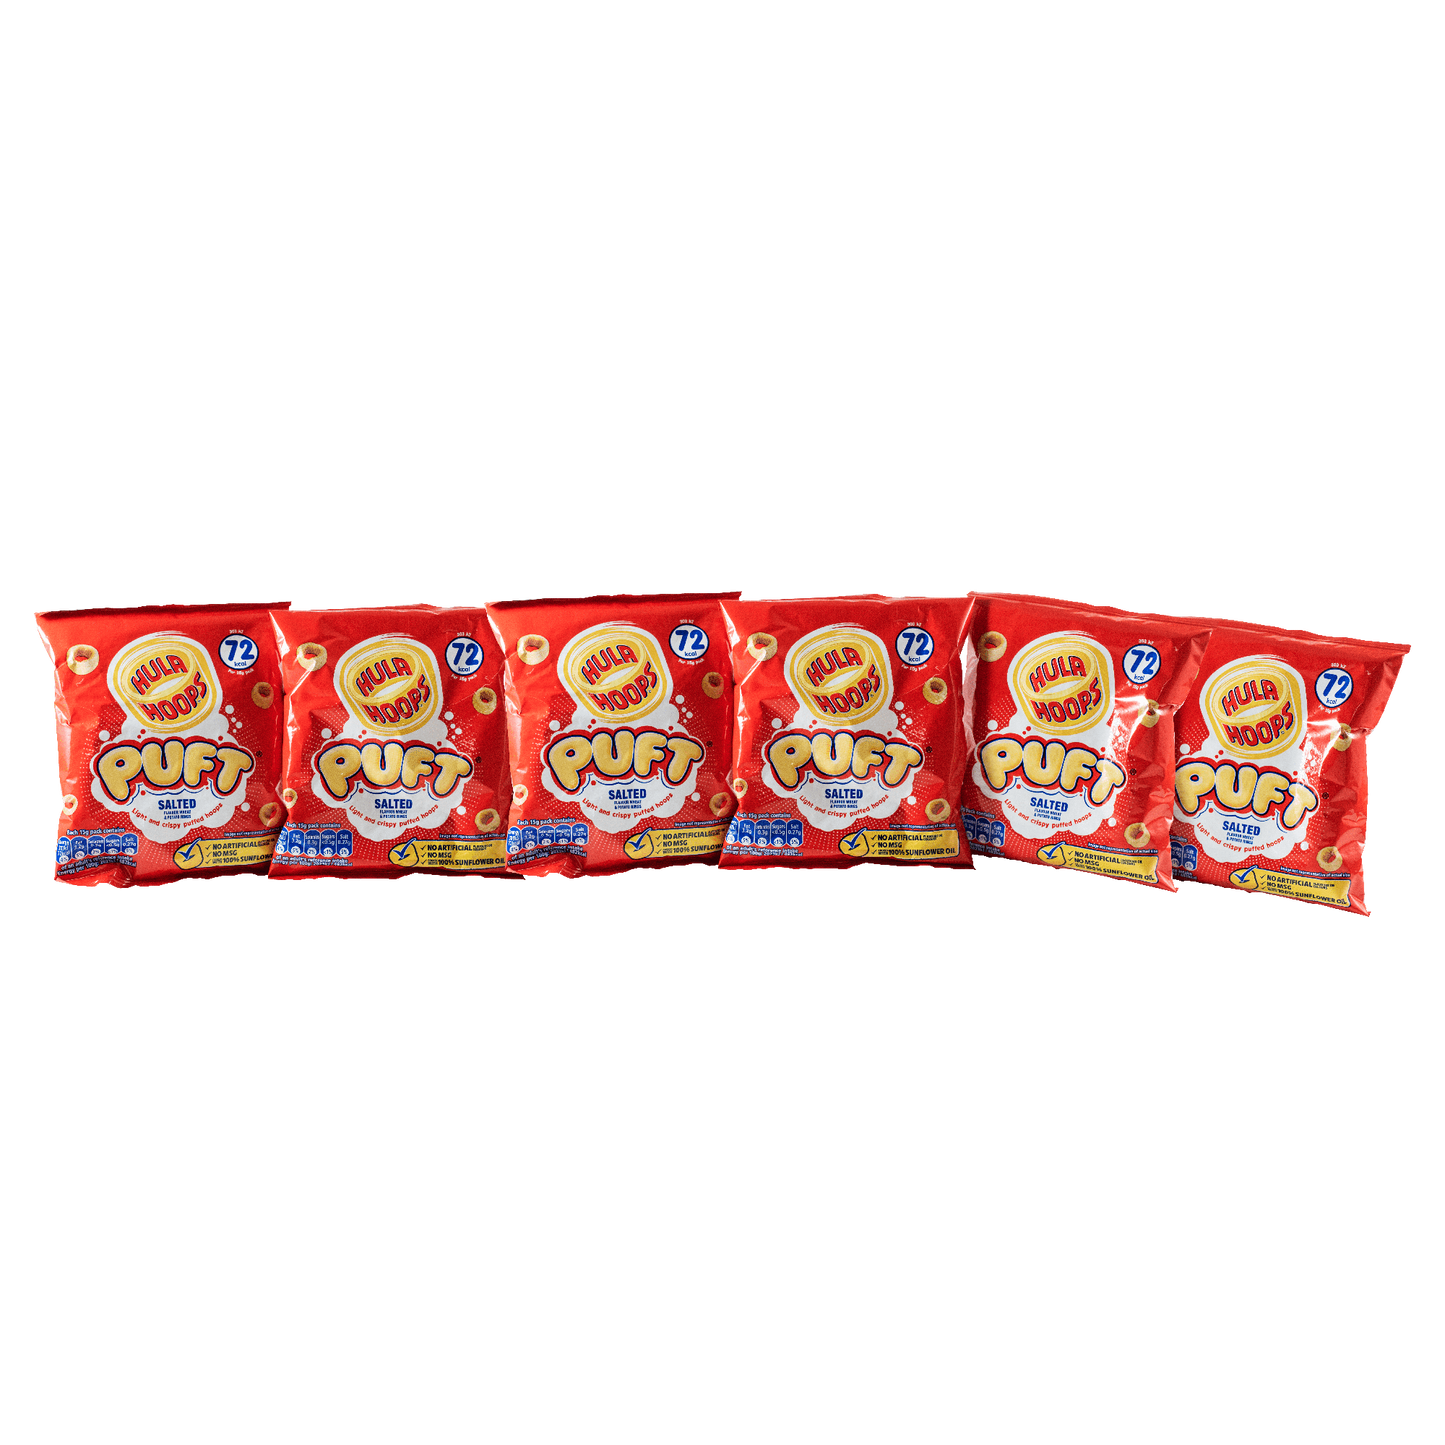 Hula Hoops Puft (Pack of 6) 15g